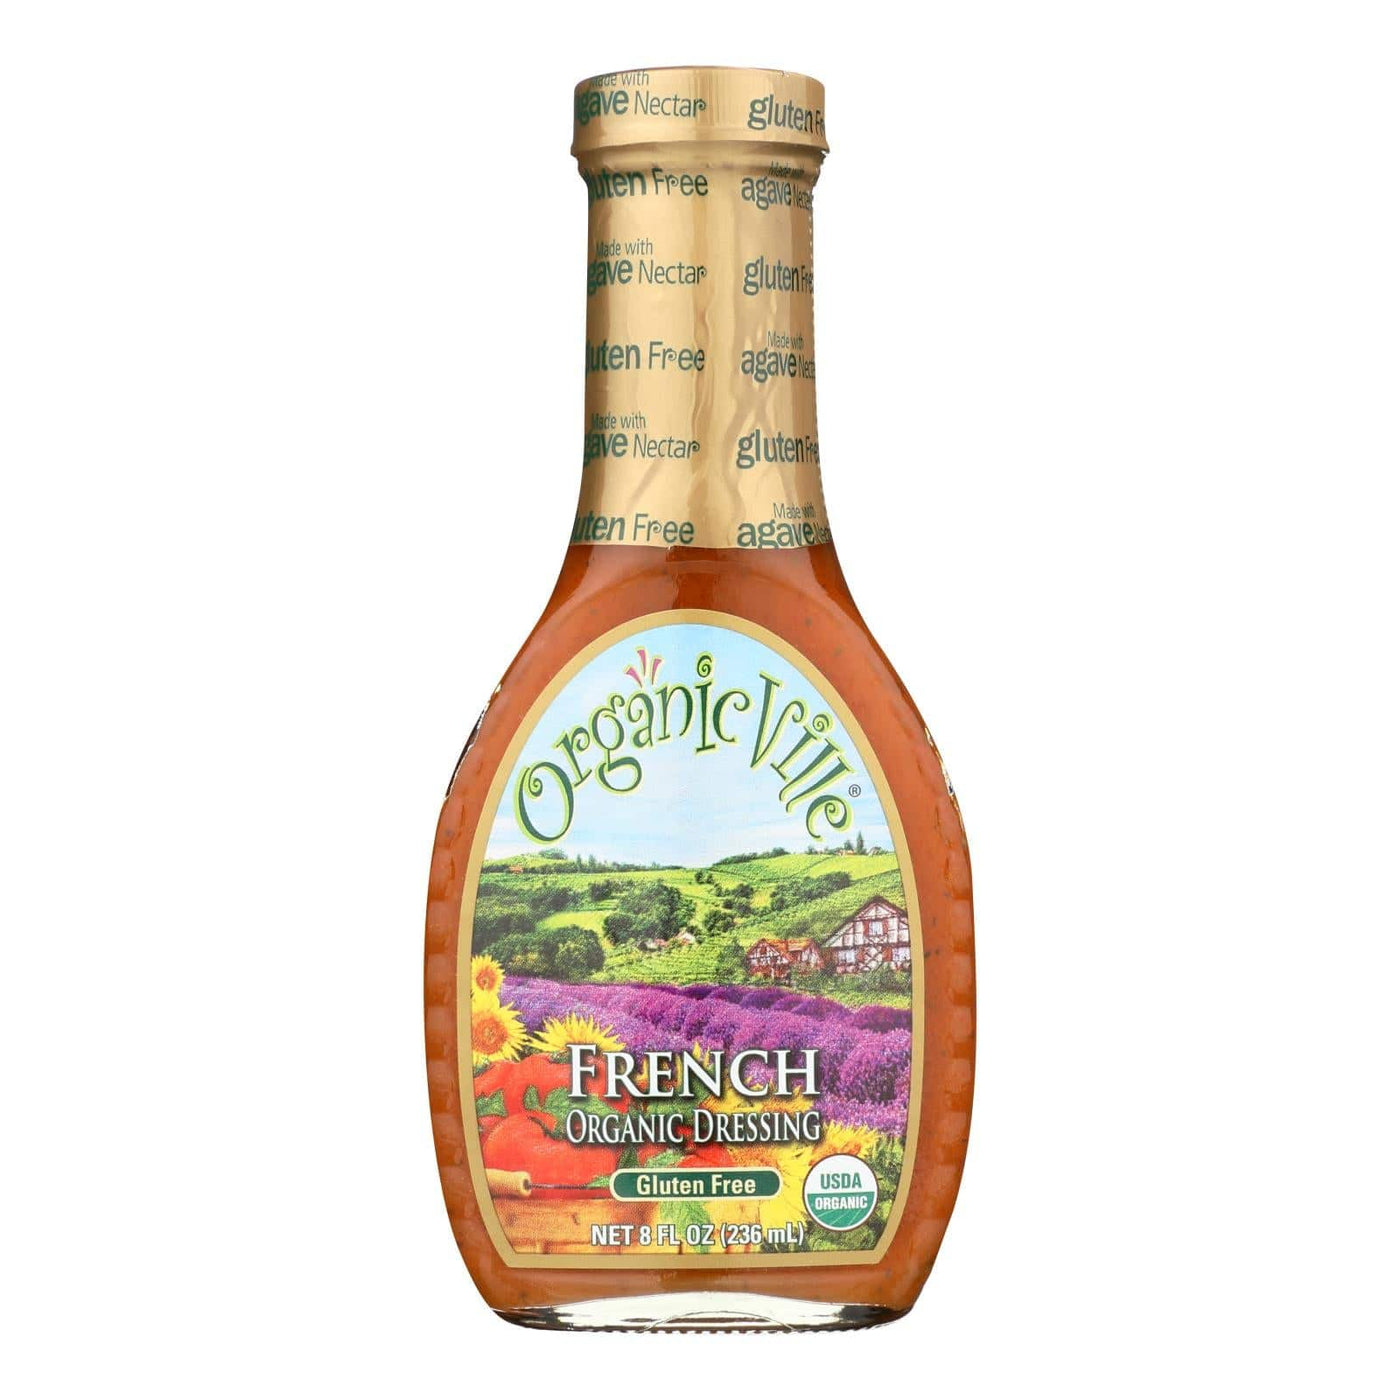 Buy Organic Ville Organic Dressing - French - Case Of 6 - 8 Fl Oz.  at OnlyNaturals.us